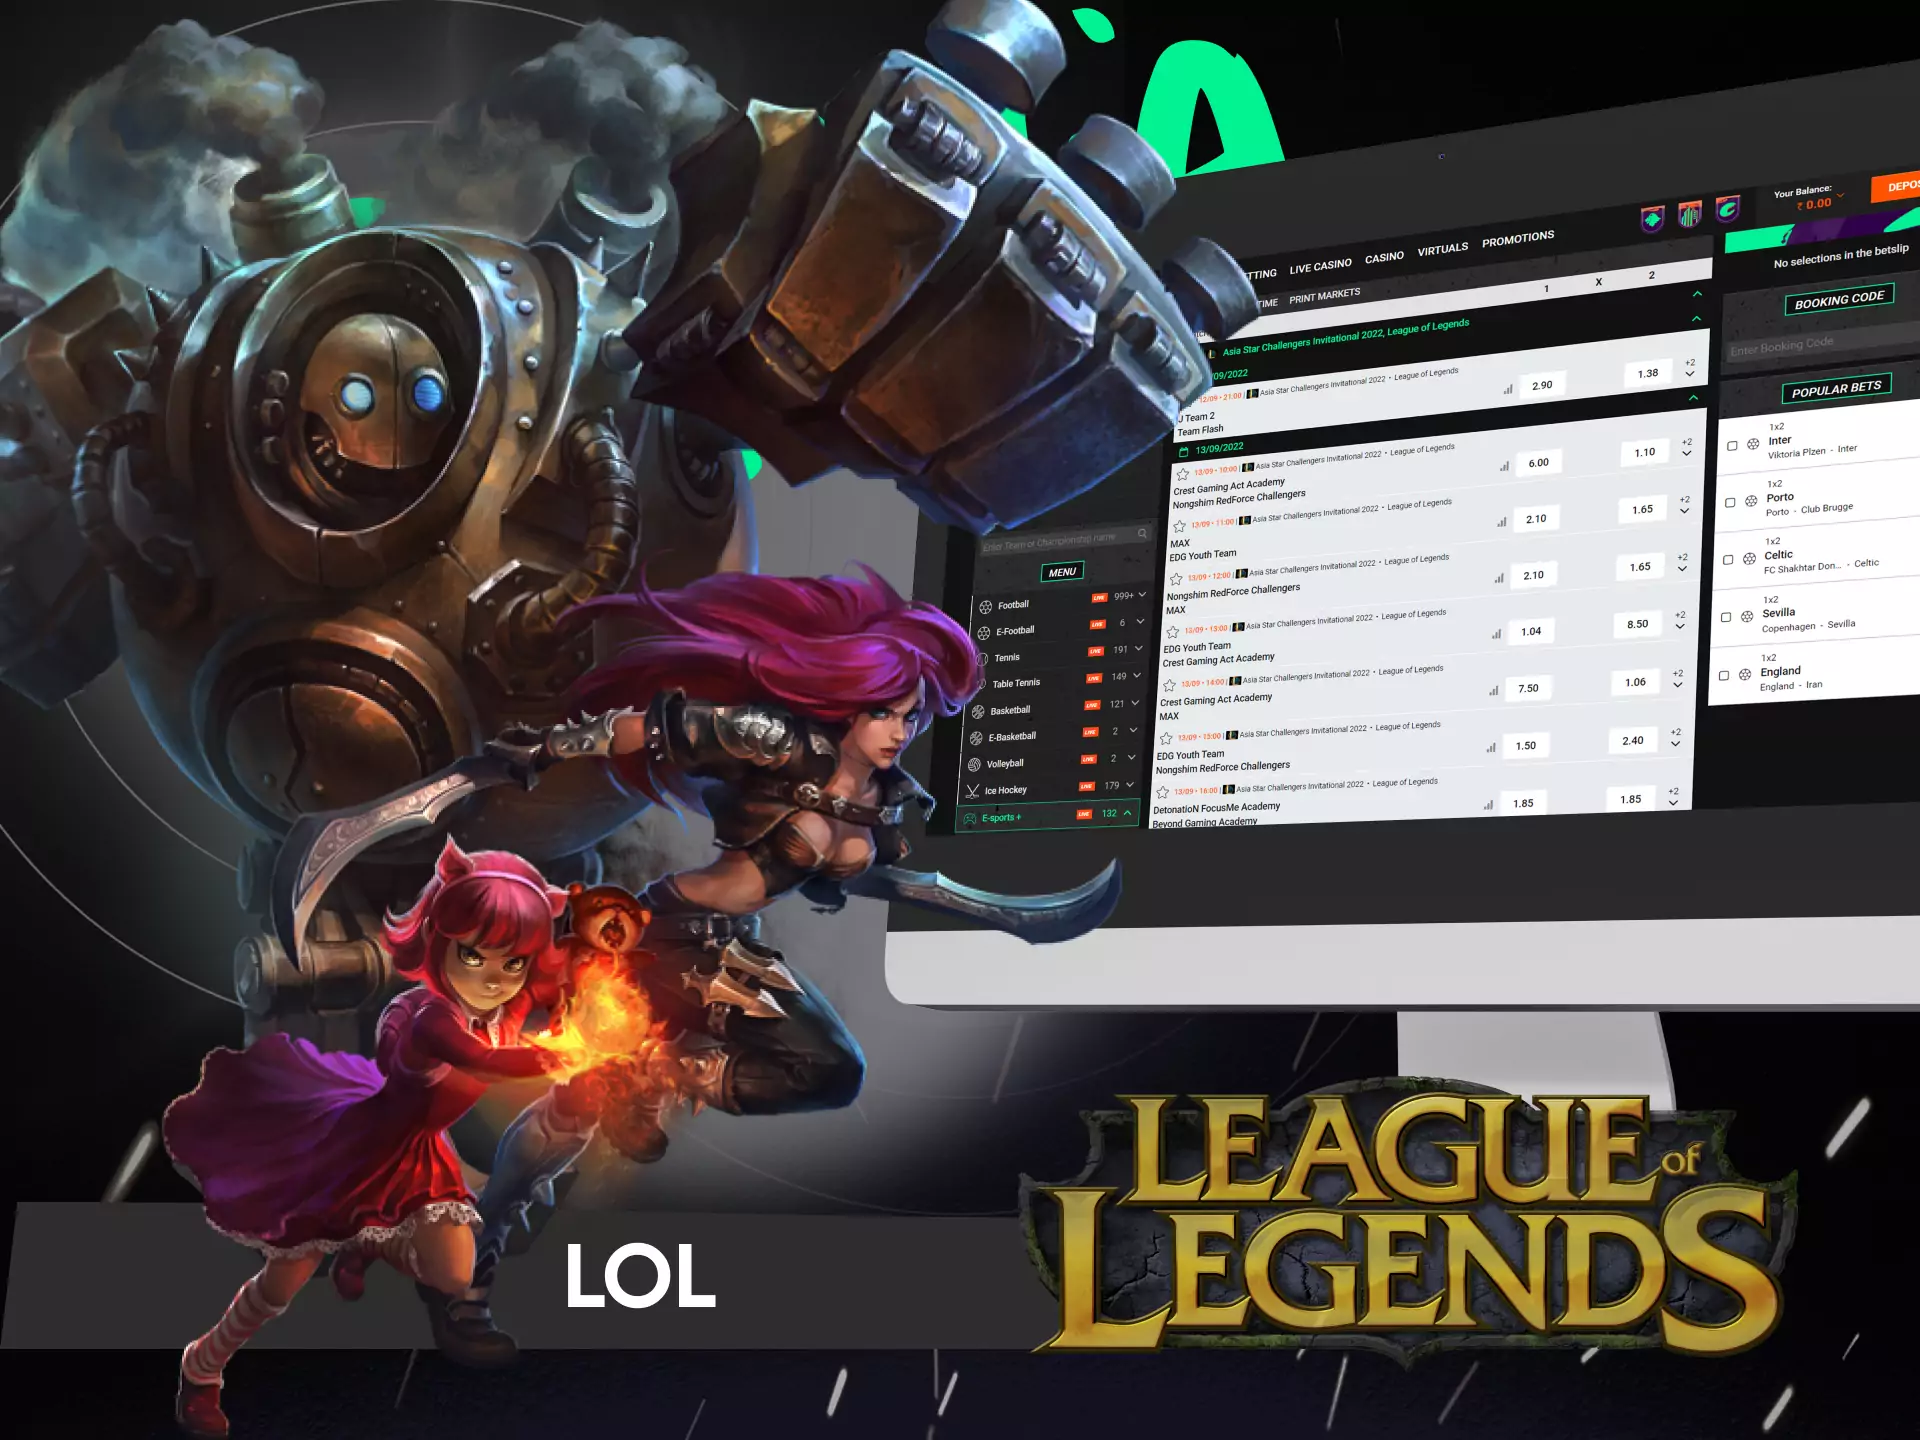 On Betinia, you can bet on the League of Legends events.